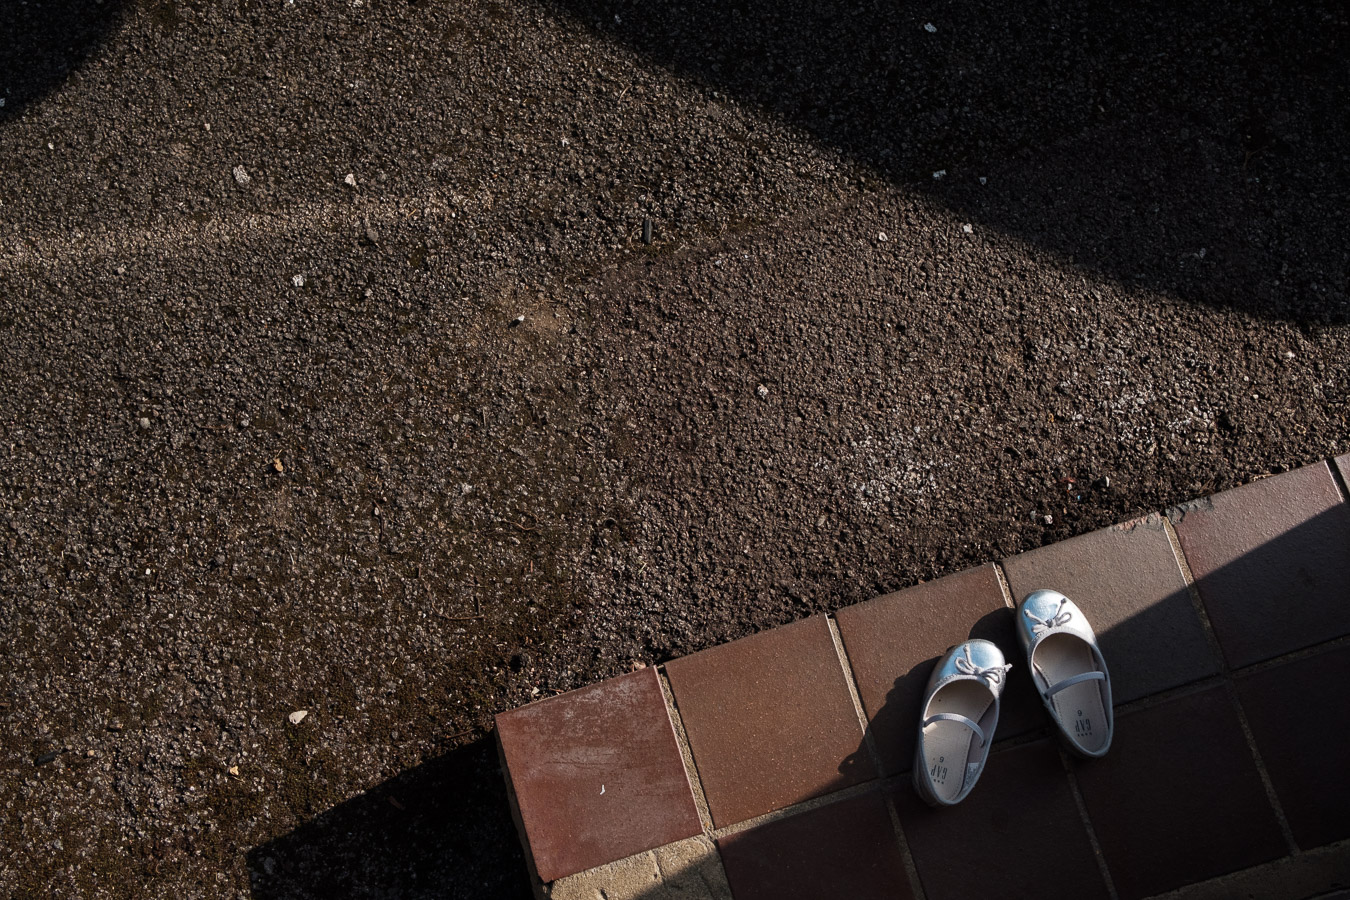 Detail photo showing girl's shoes taken off and left by the front door outside